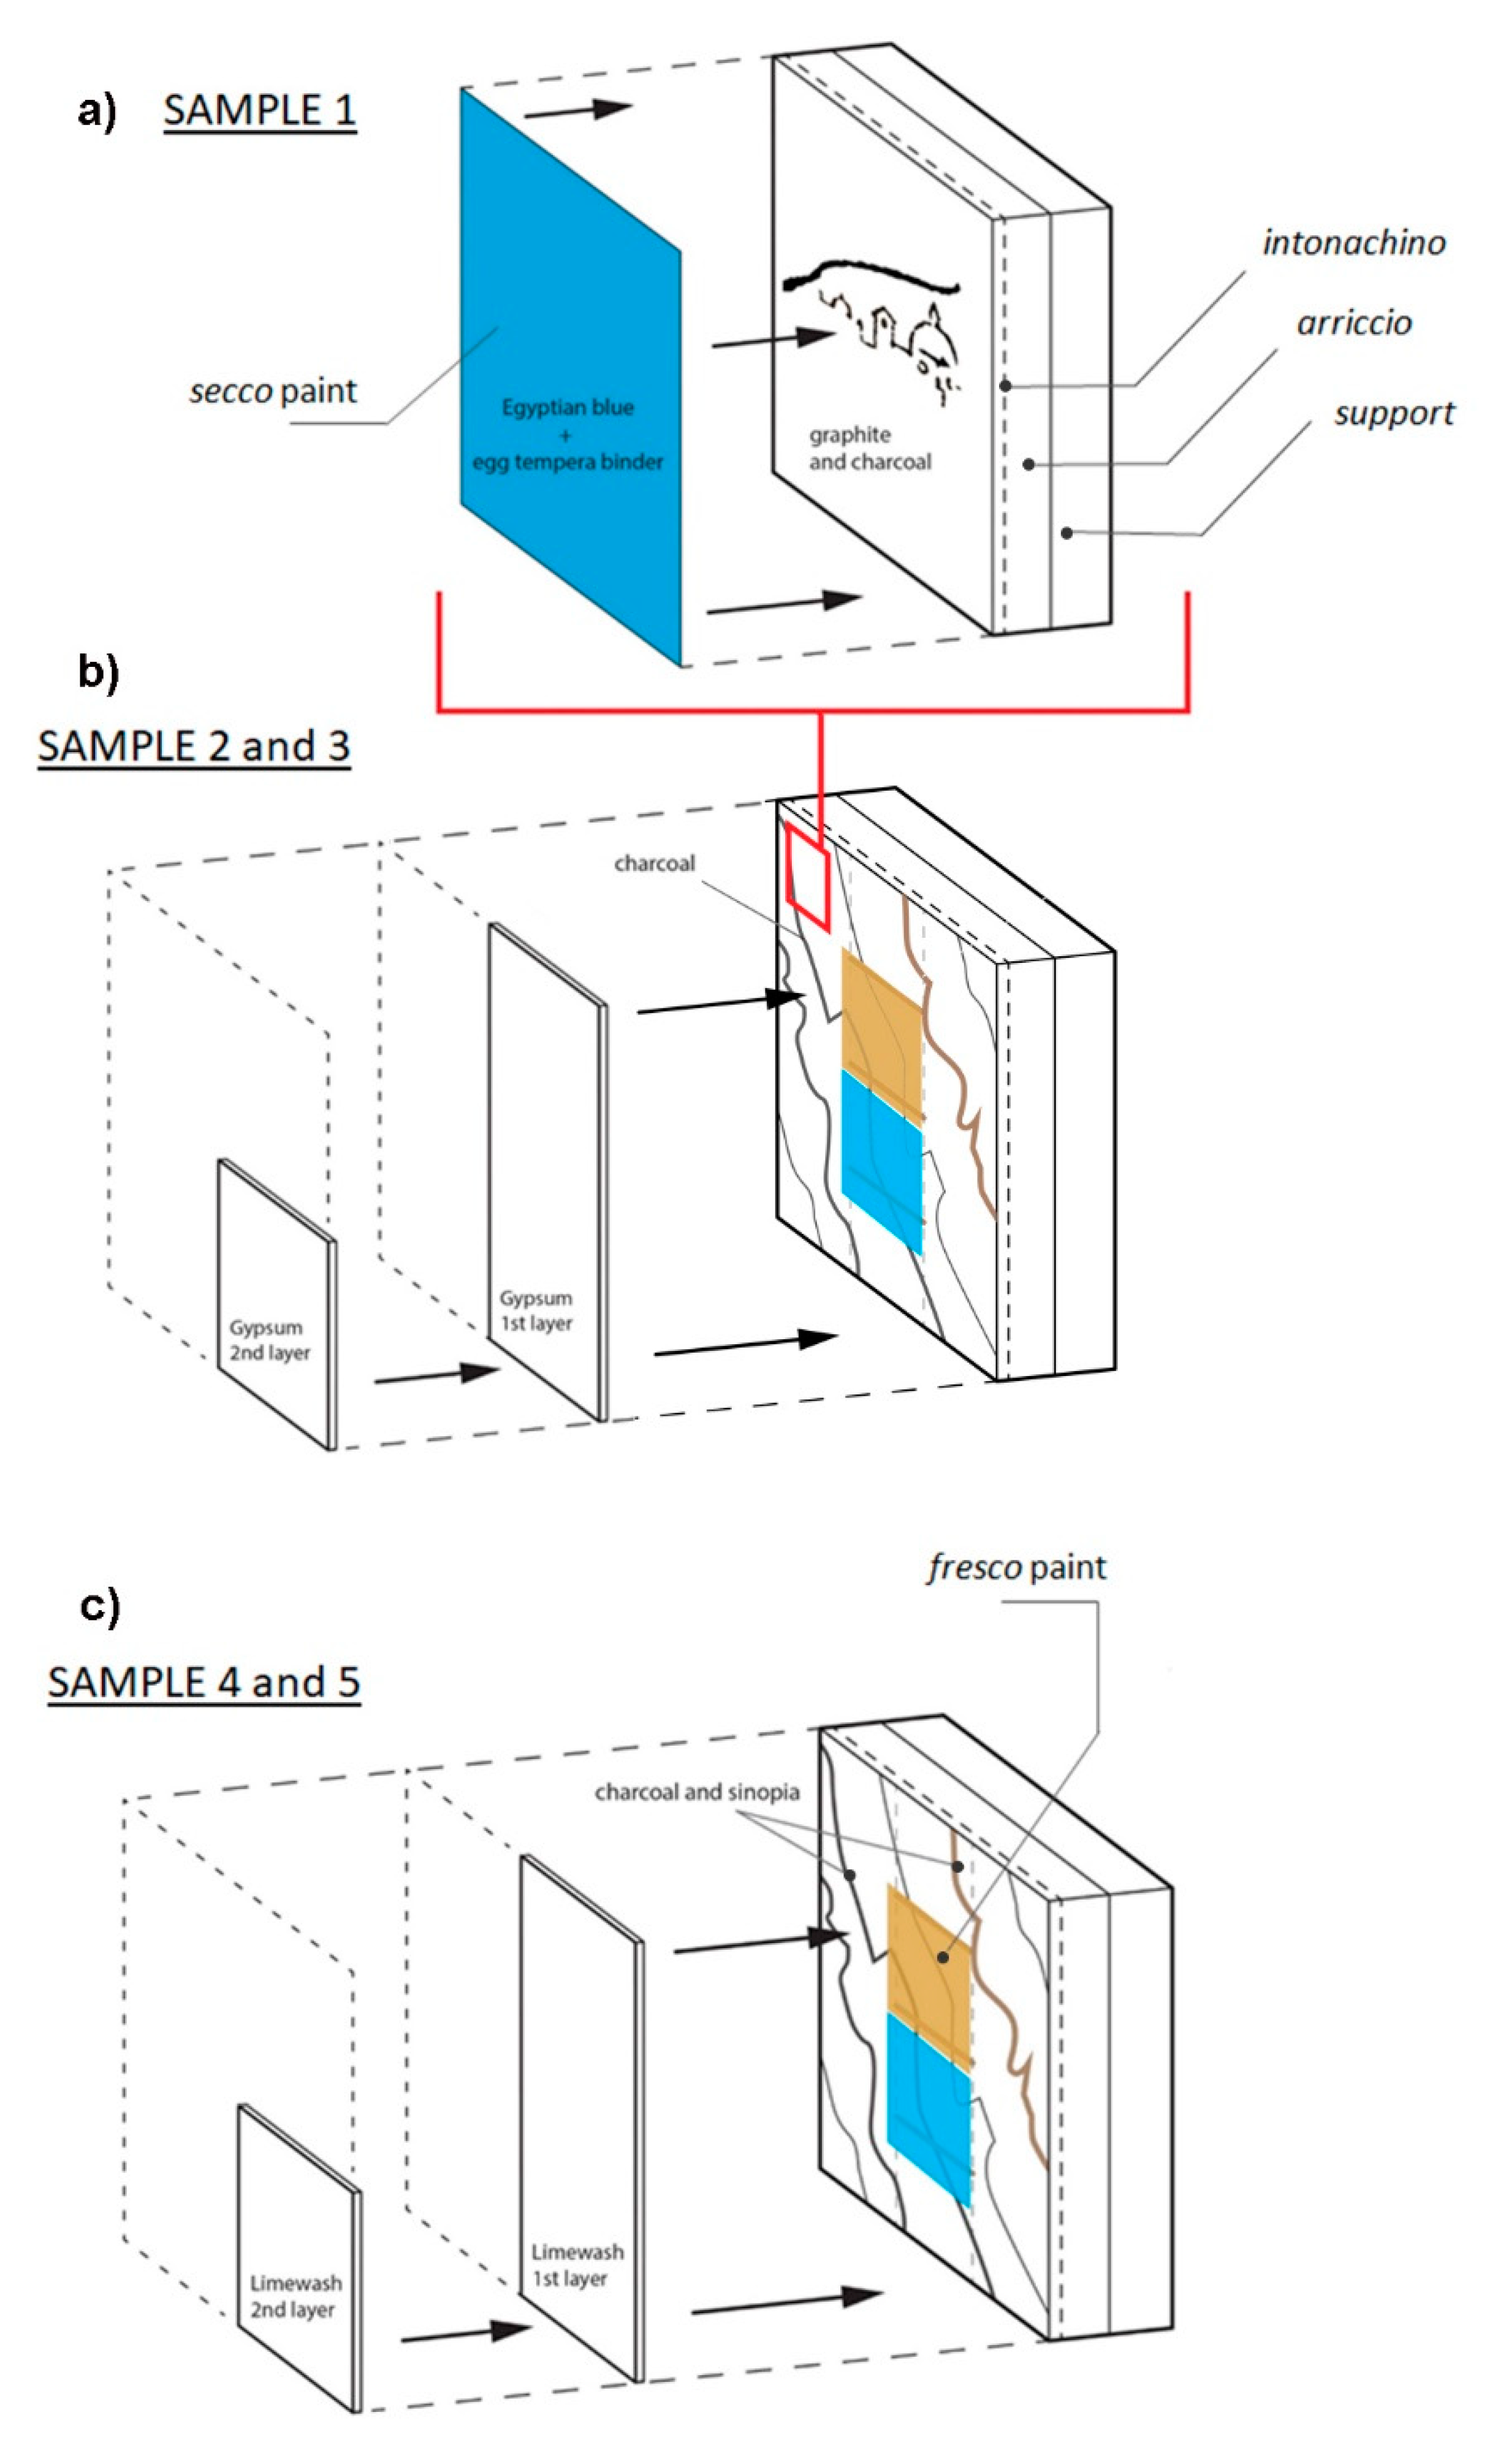 J. Imaging | Free Full-Text | Revealing Underdrawings in Wall Paintings of  Complex Stratigraphy with a Novel Reflectance Photoacoustic Imaging  Prototype | HTML